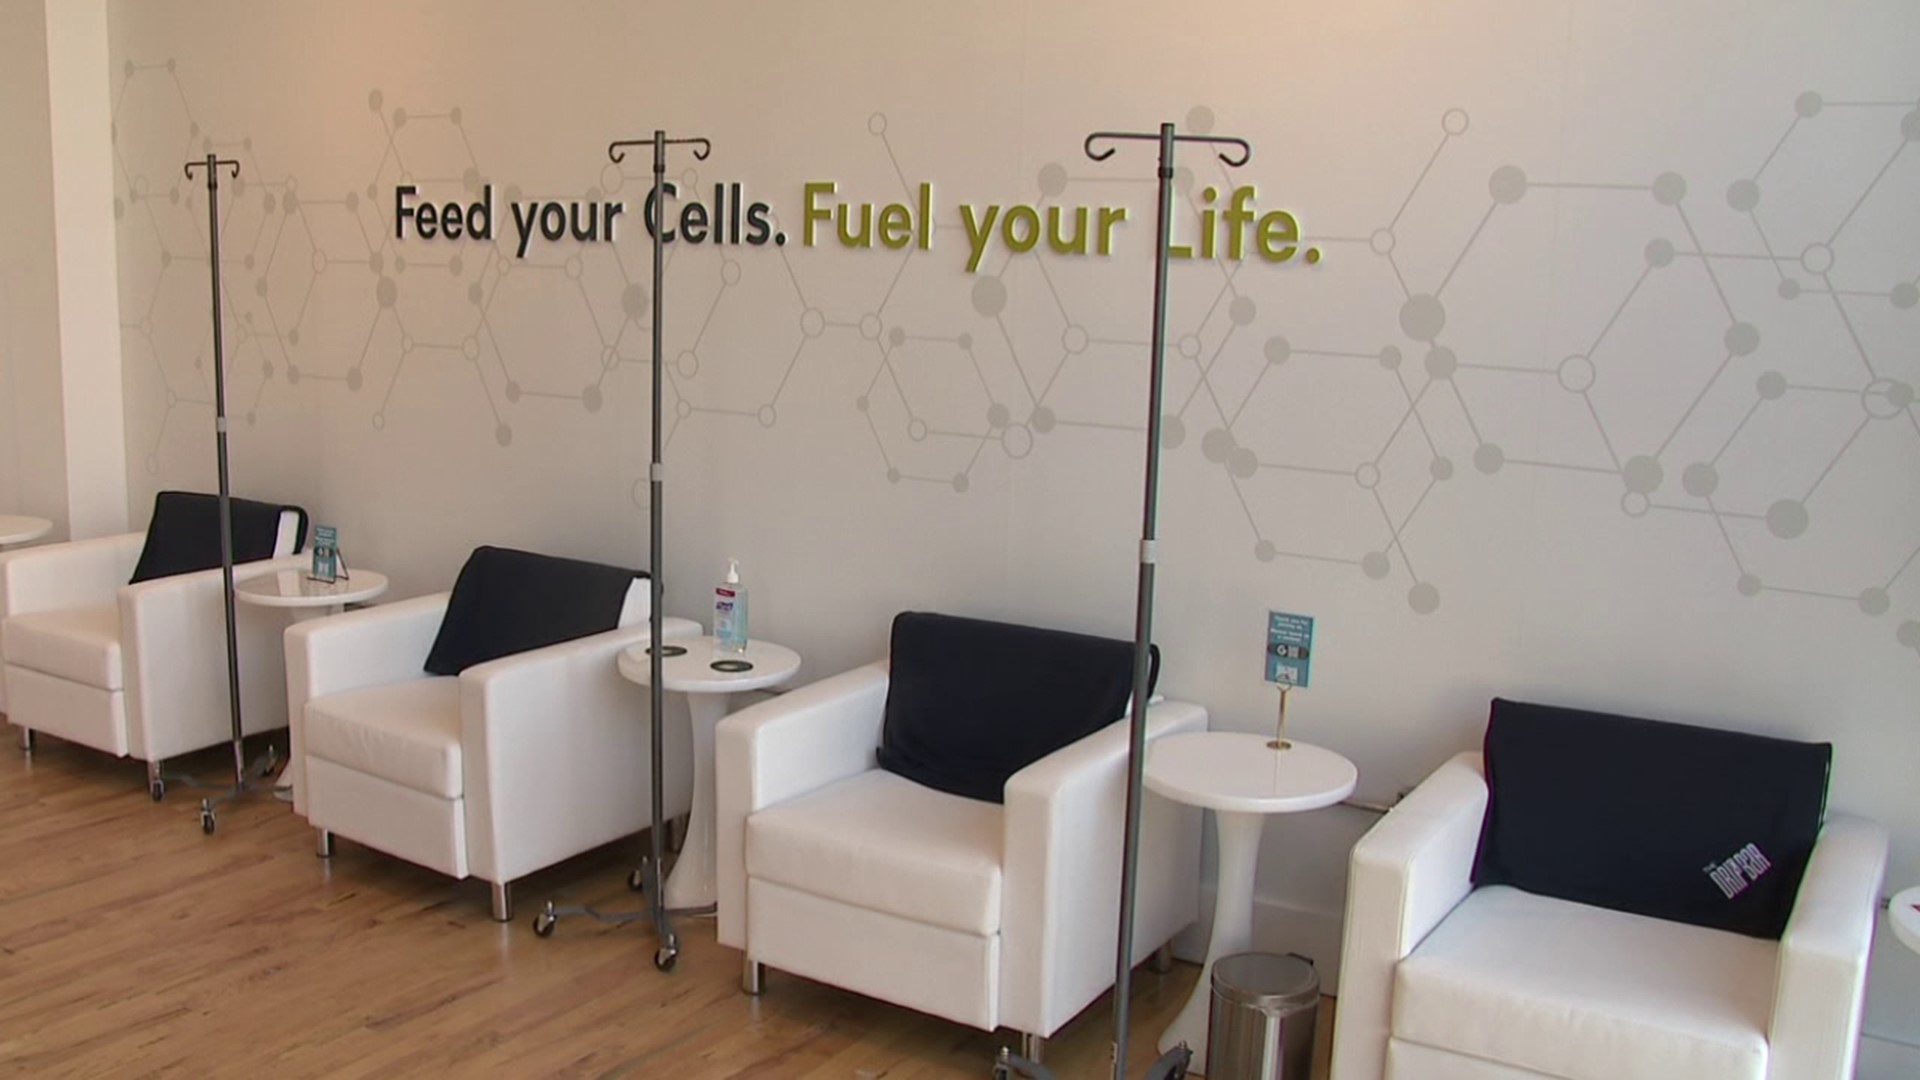 The DripBar, located along Adams Avenue, is all about keeping people healthy through IV infusion therapy.